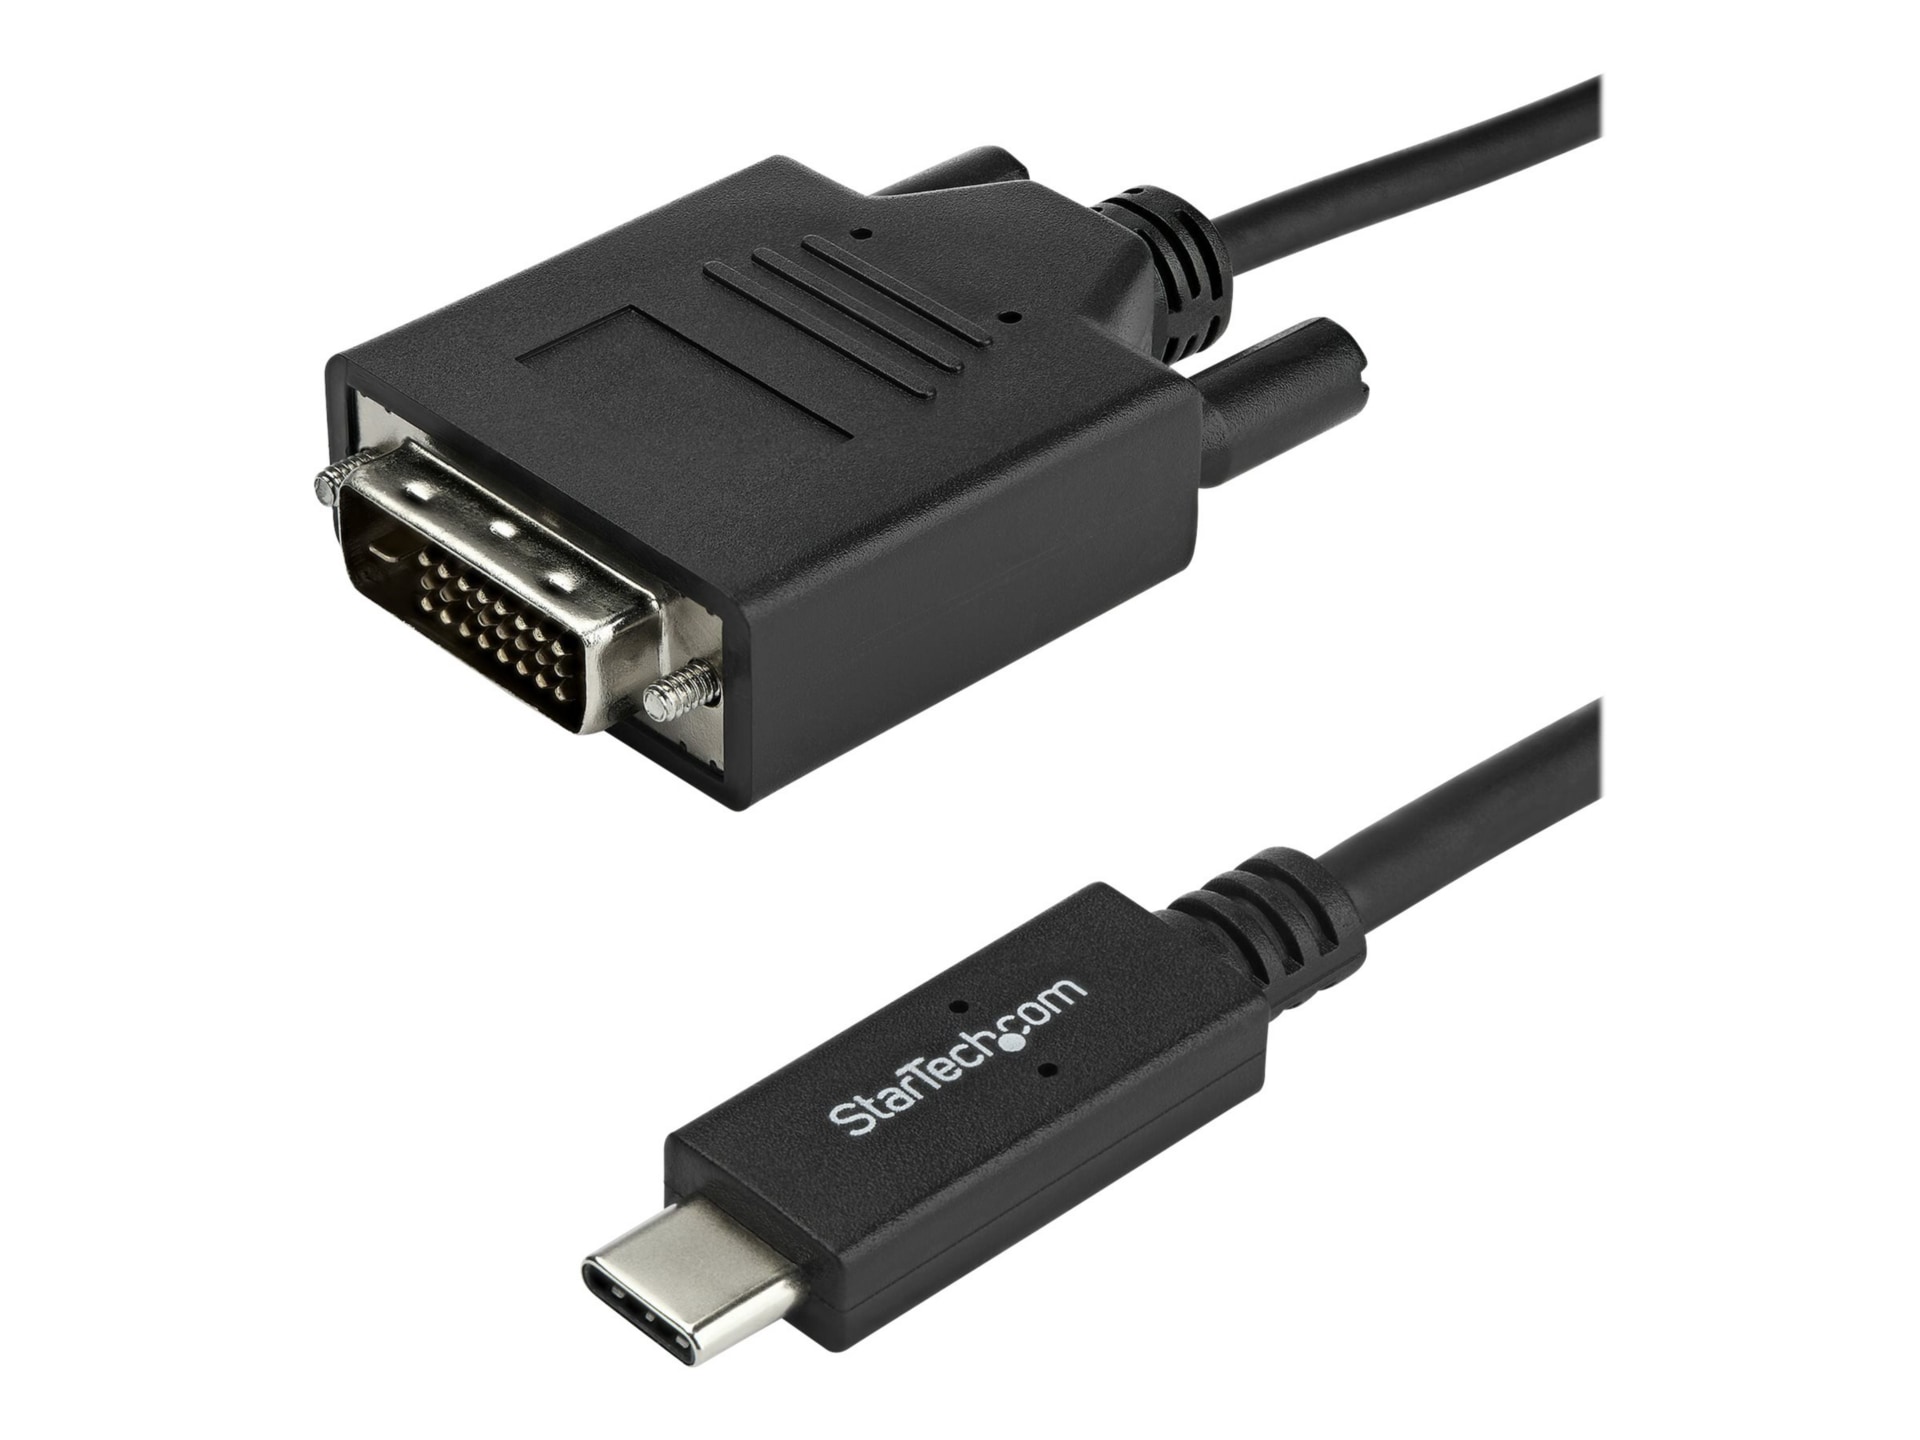 StarTech.com 3,3 ft / 1 m USB-C to DVI Cable - USB Type-C Video Adapter Cable - 1920 x 1200 - Black